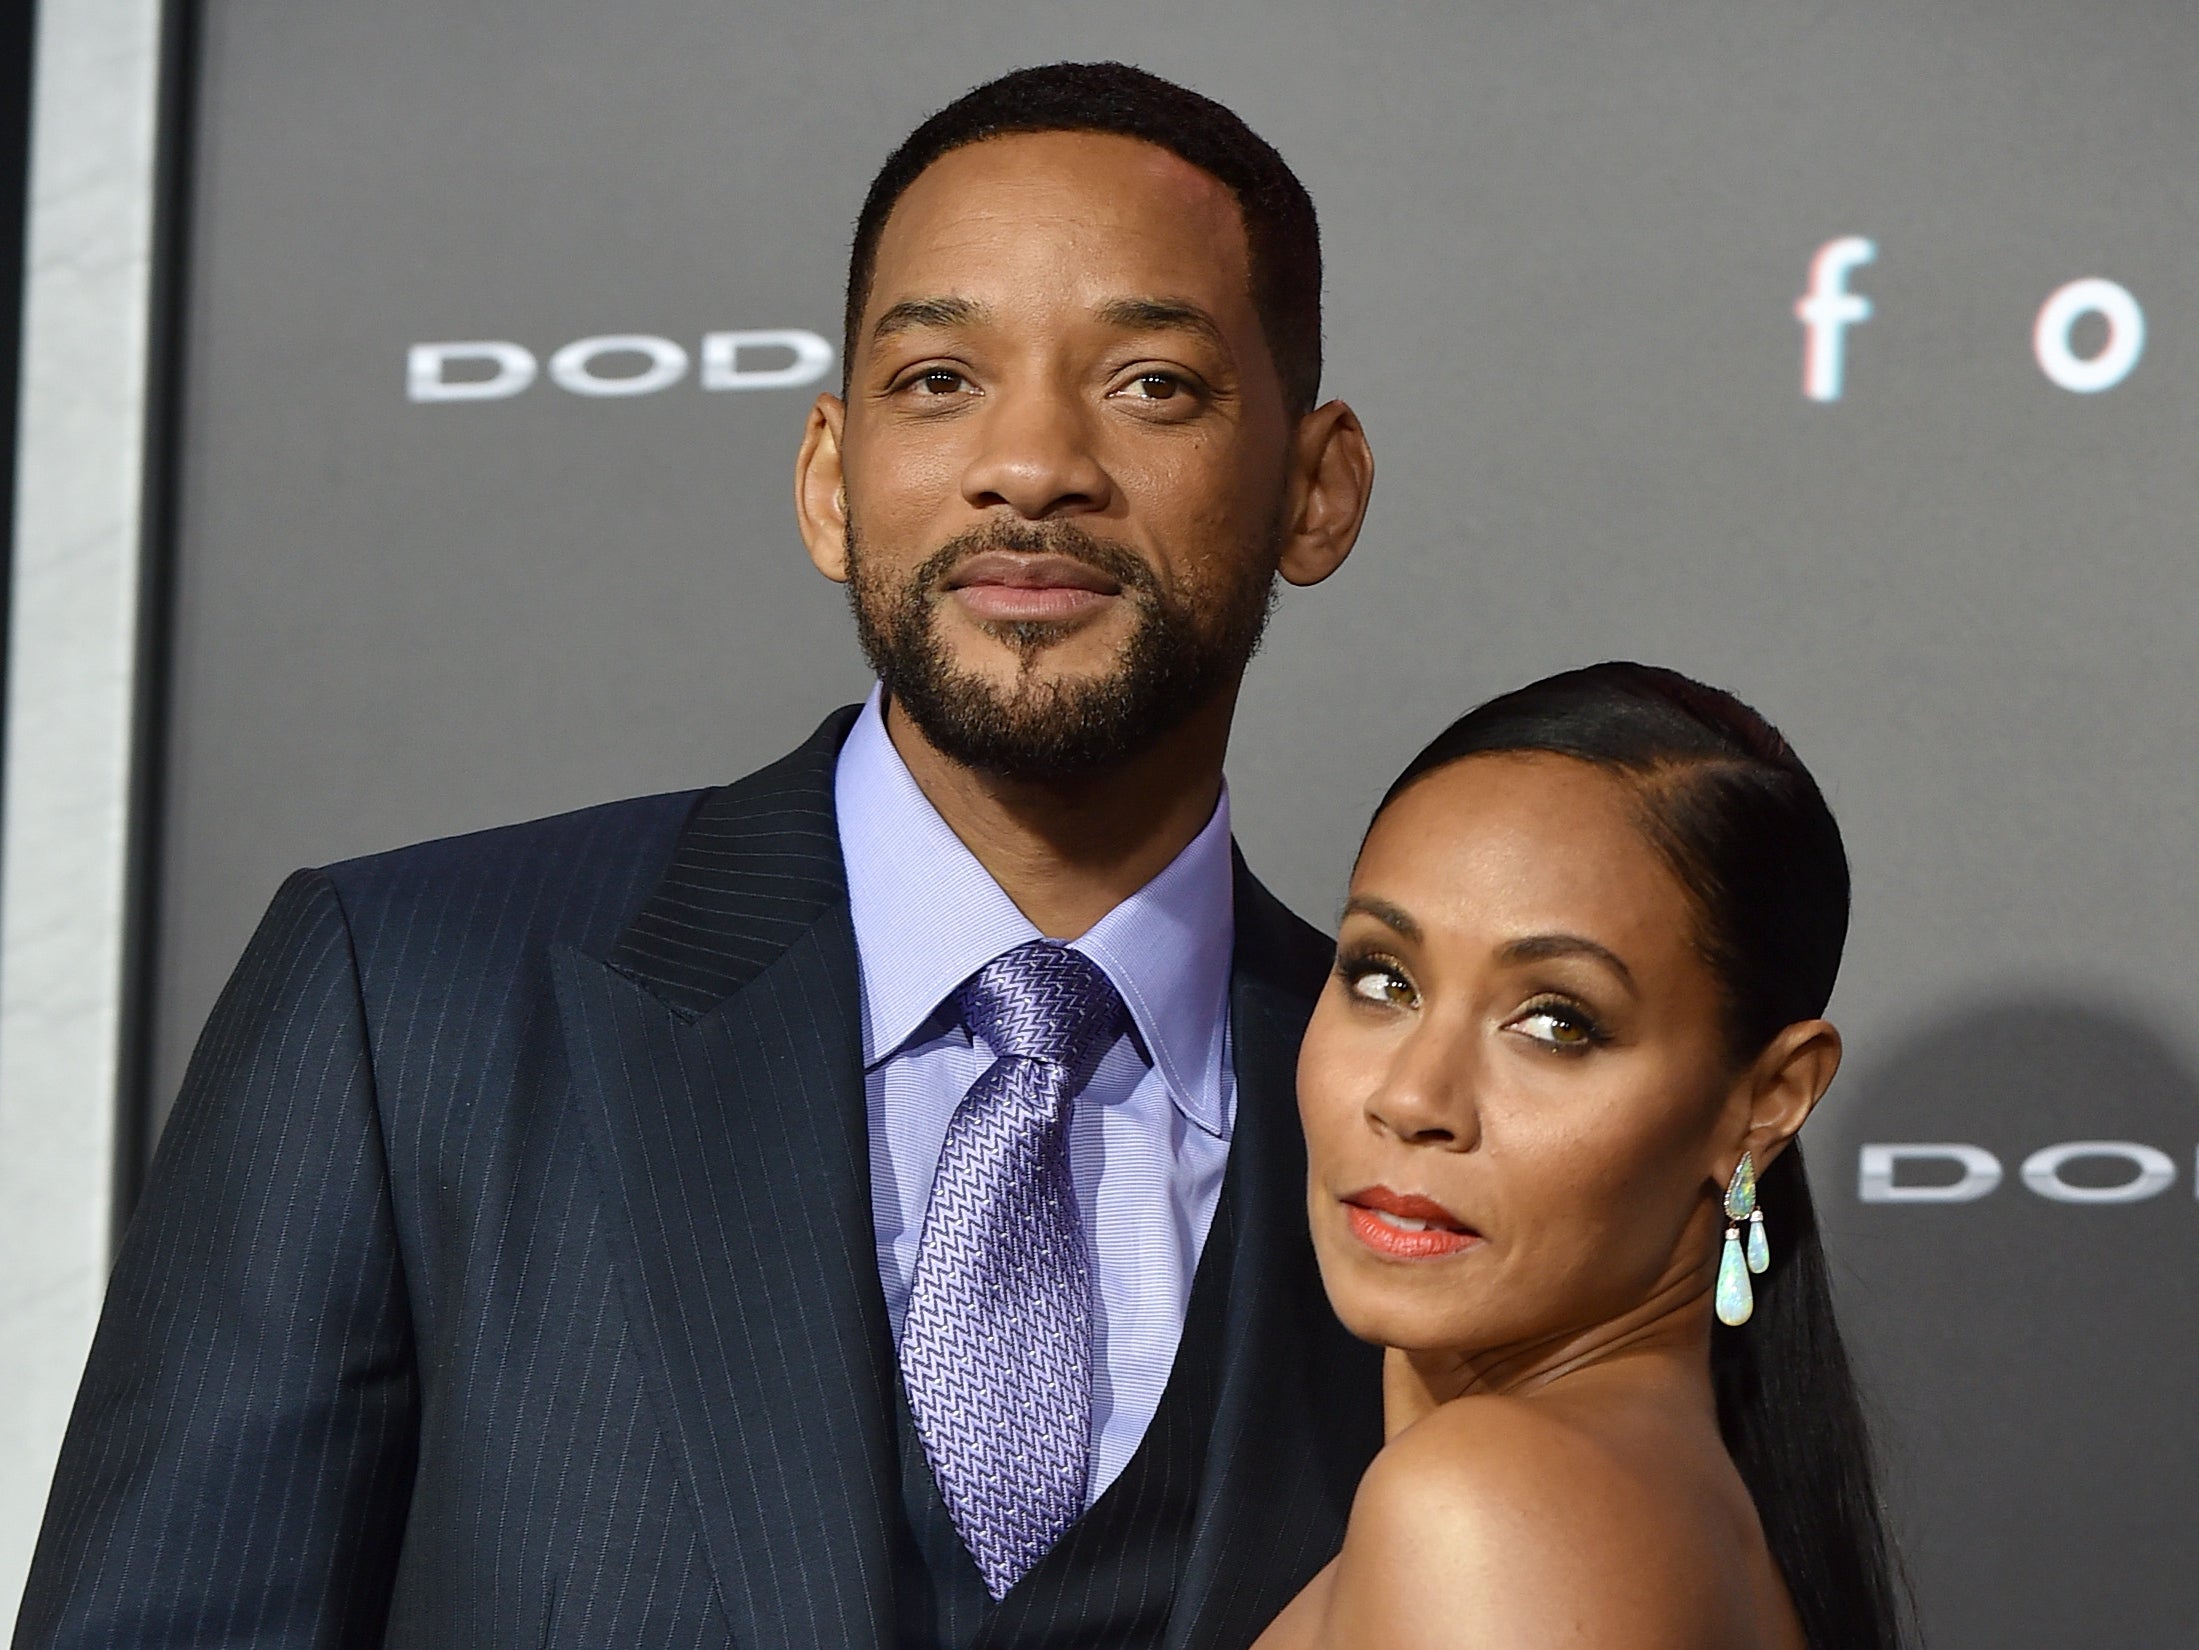 Will Smith and Jada Pinkett Smith photographed in 2015